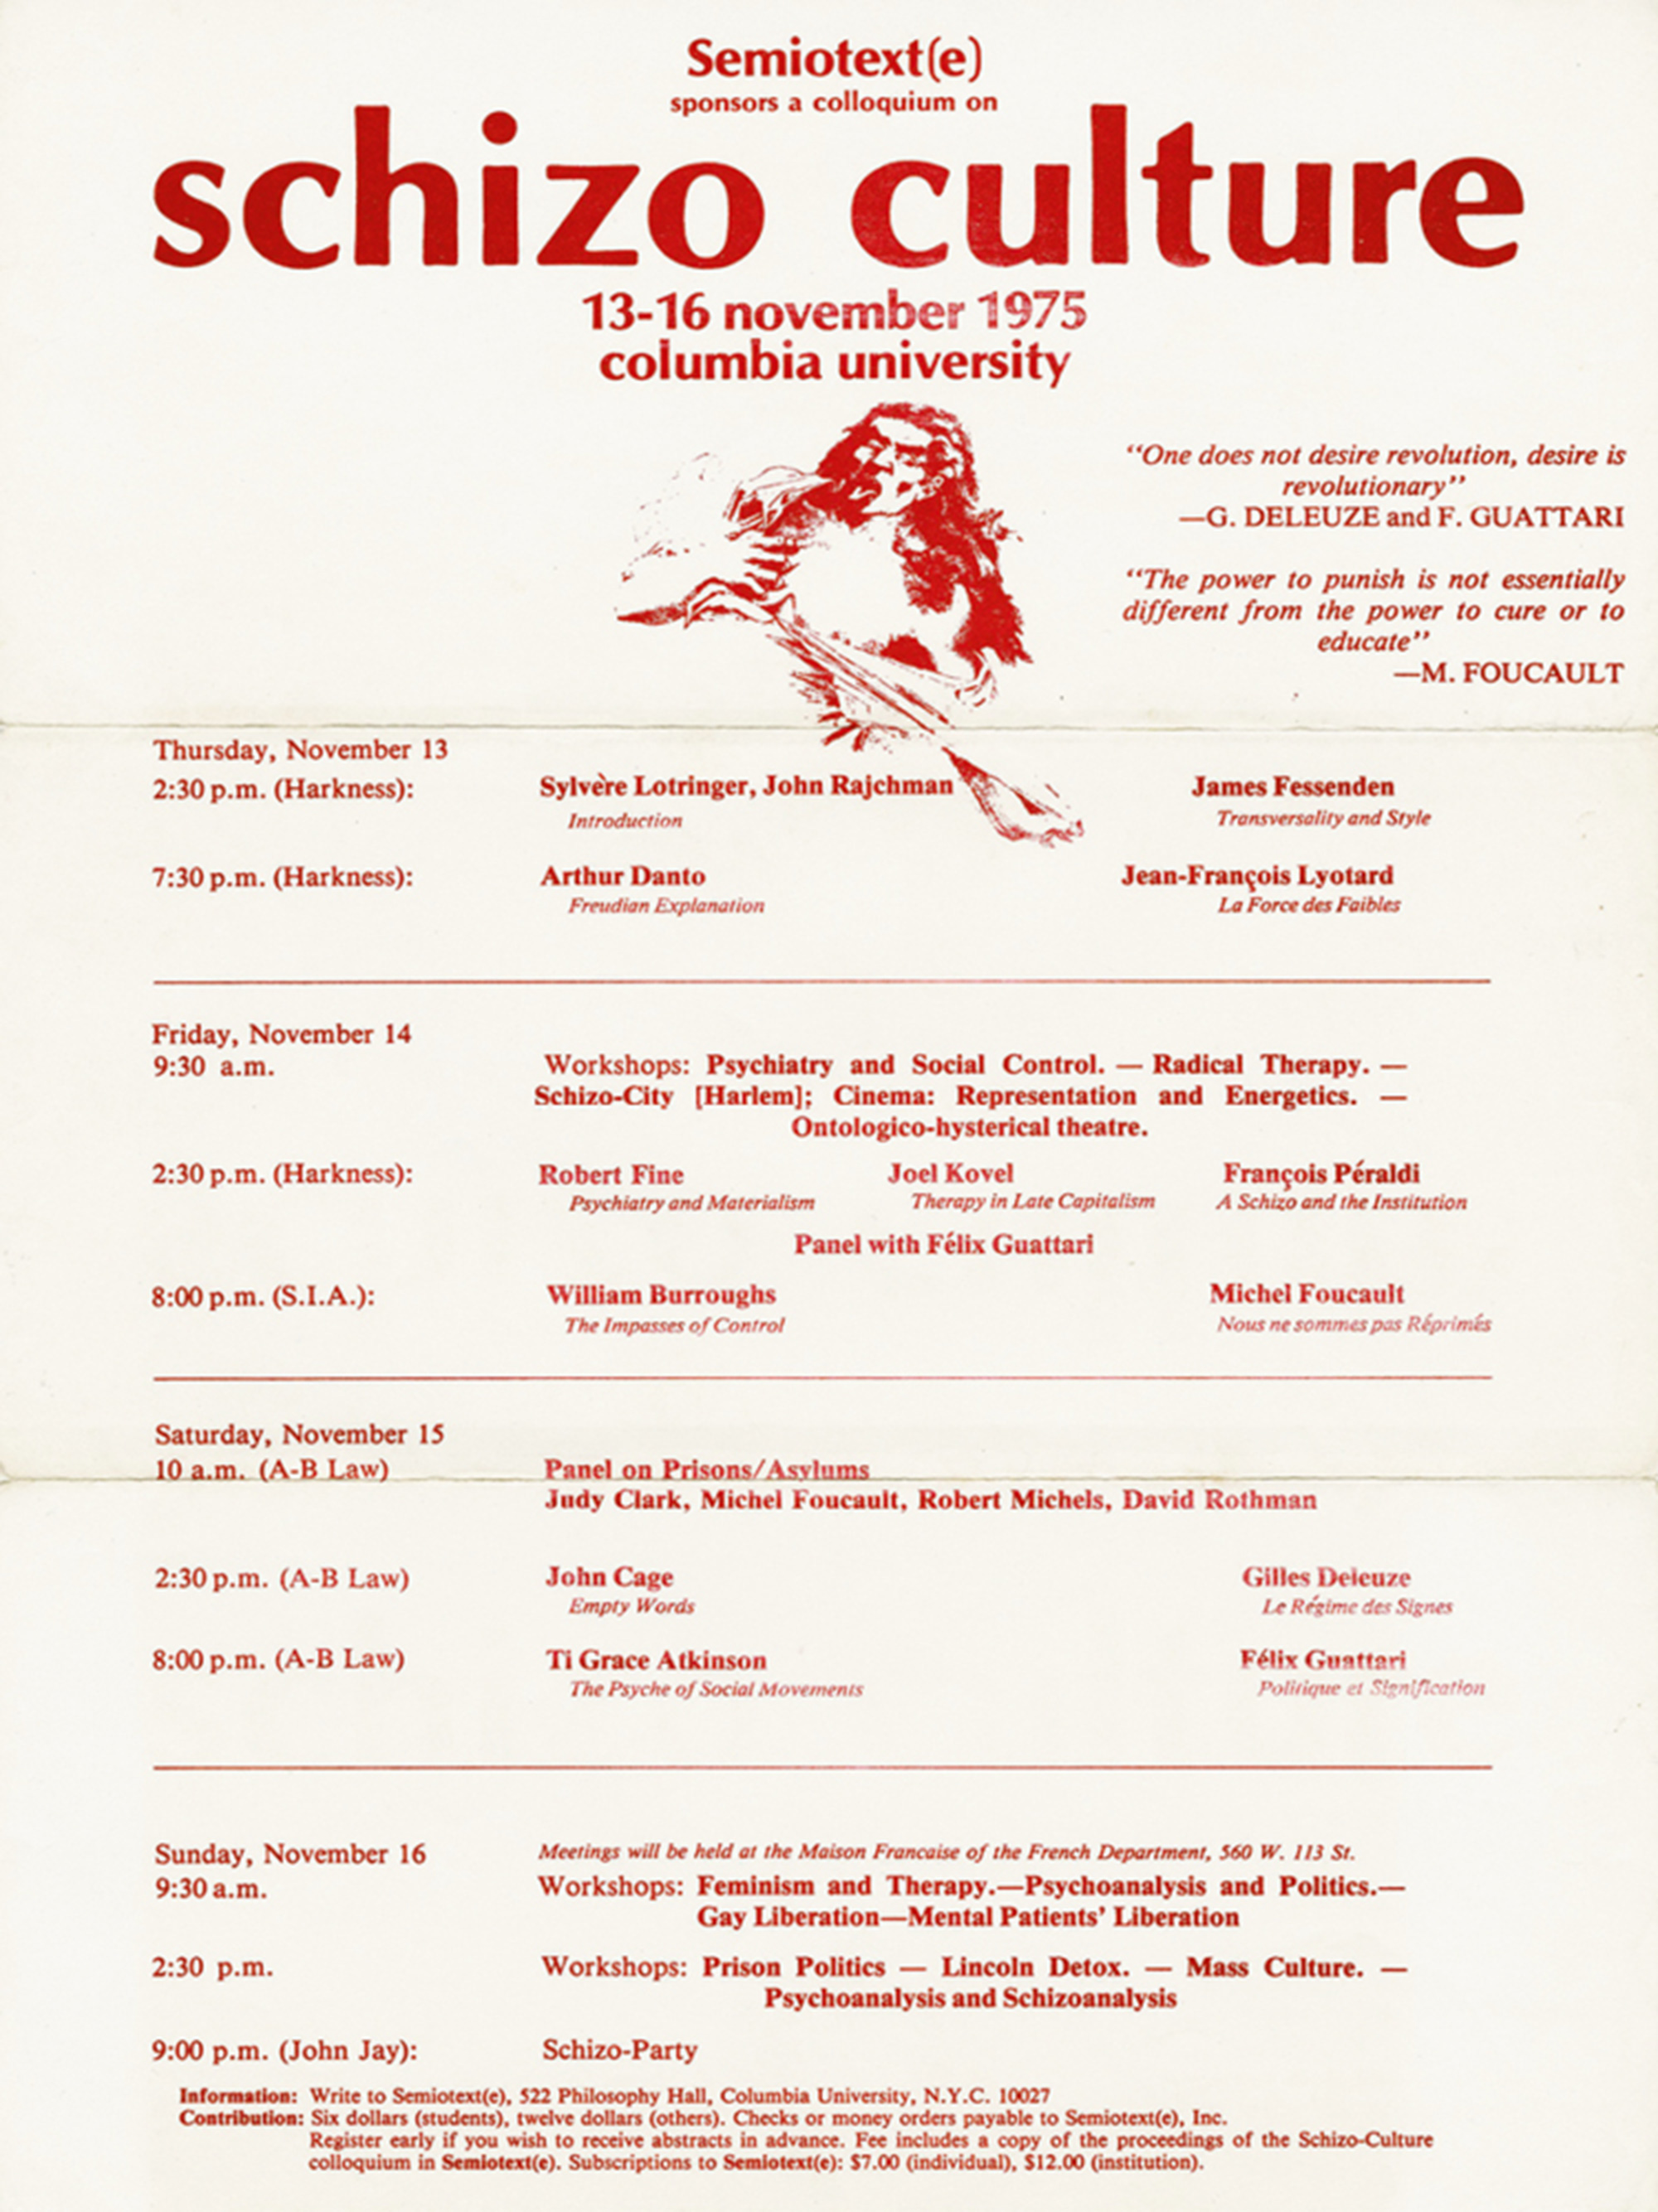 A poster promoting the infamous nineteen seventy-five “schizo culture” conference.